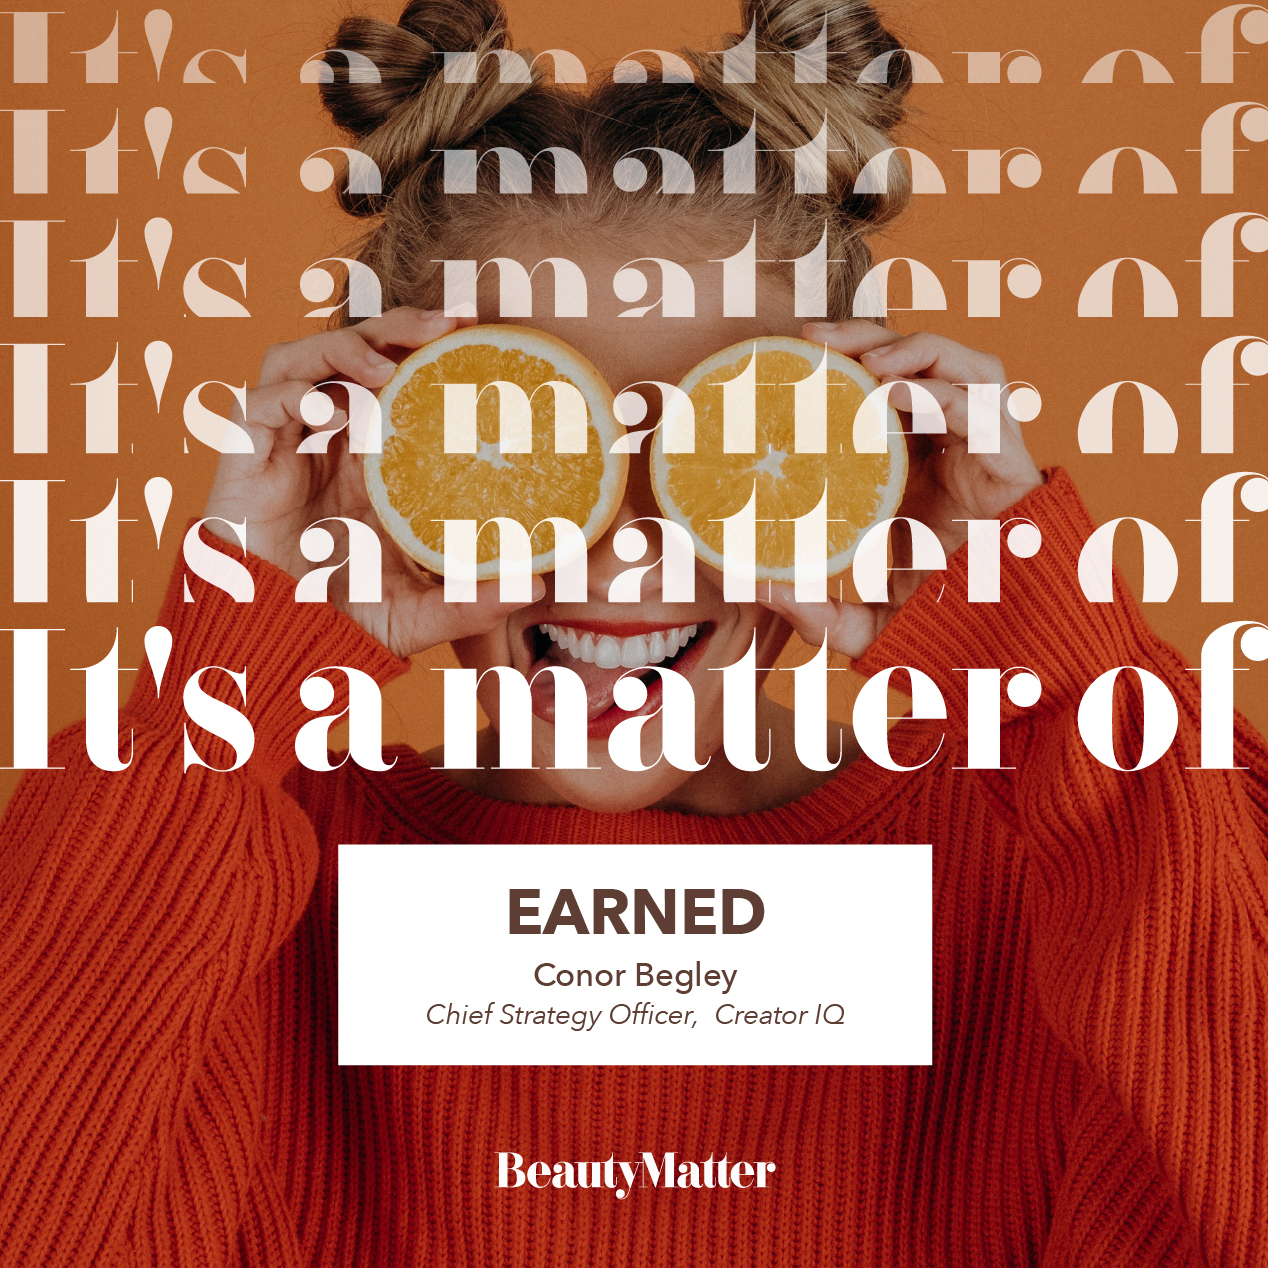 In Ep. 59 of Earned Conor Begley chats with BeautyMatter